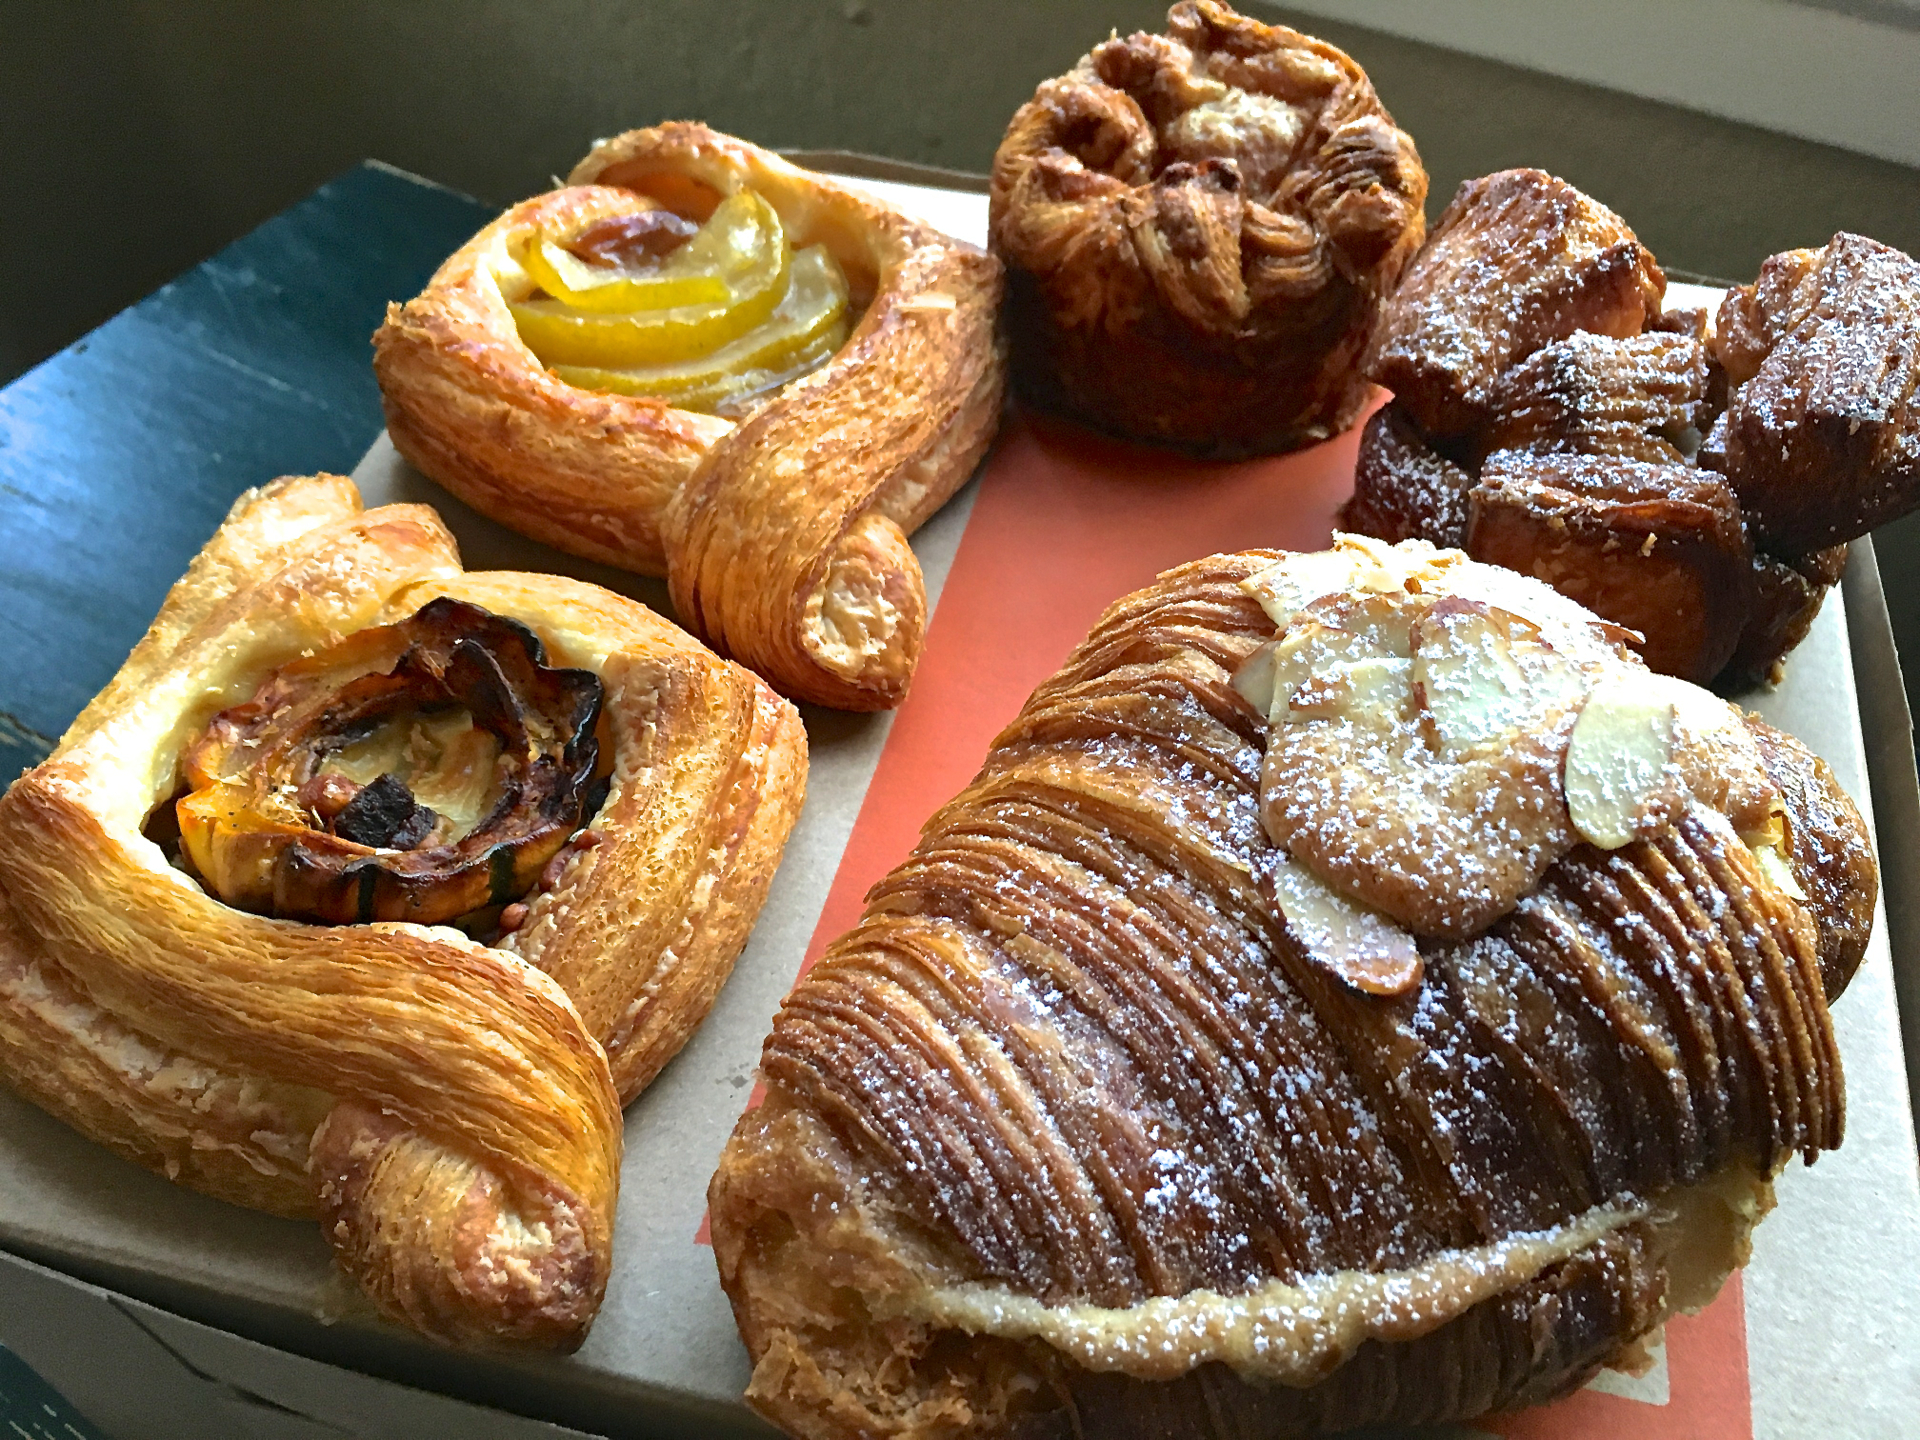 A selection of pastries from Manresa Bread.